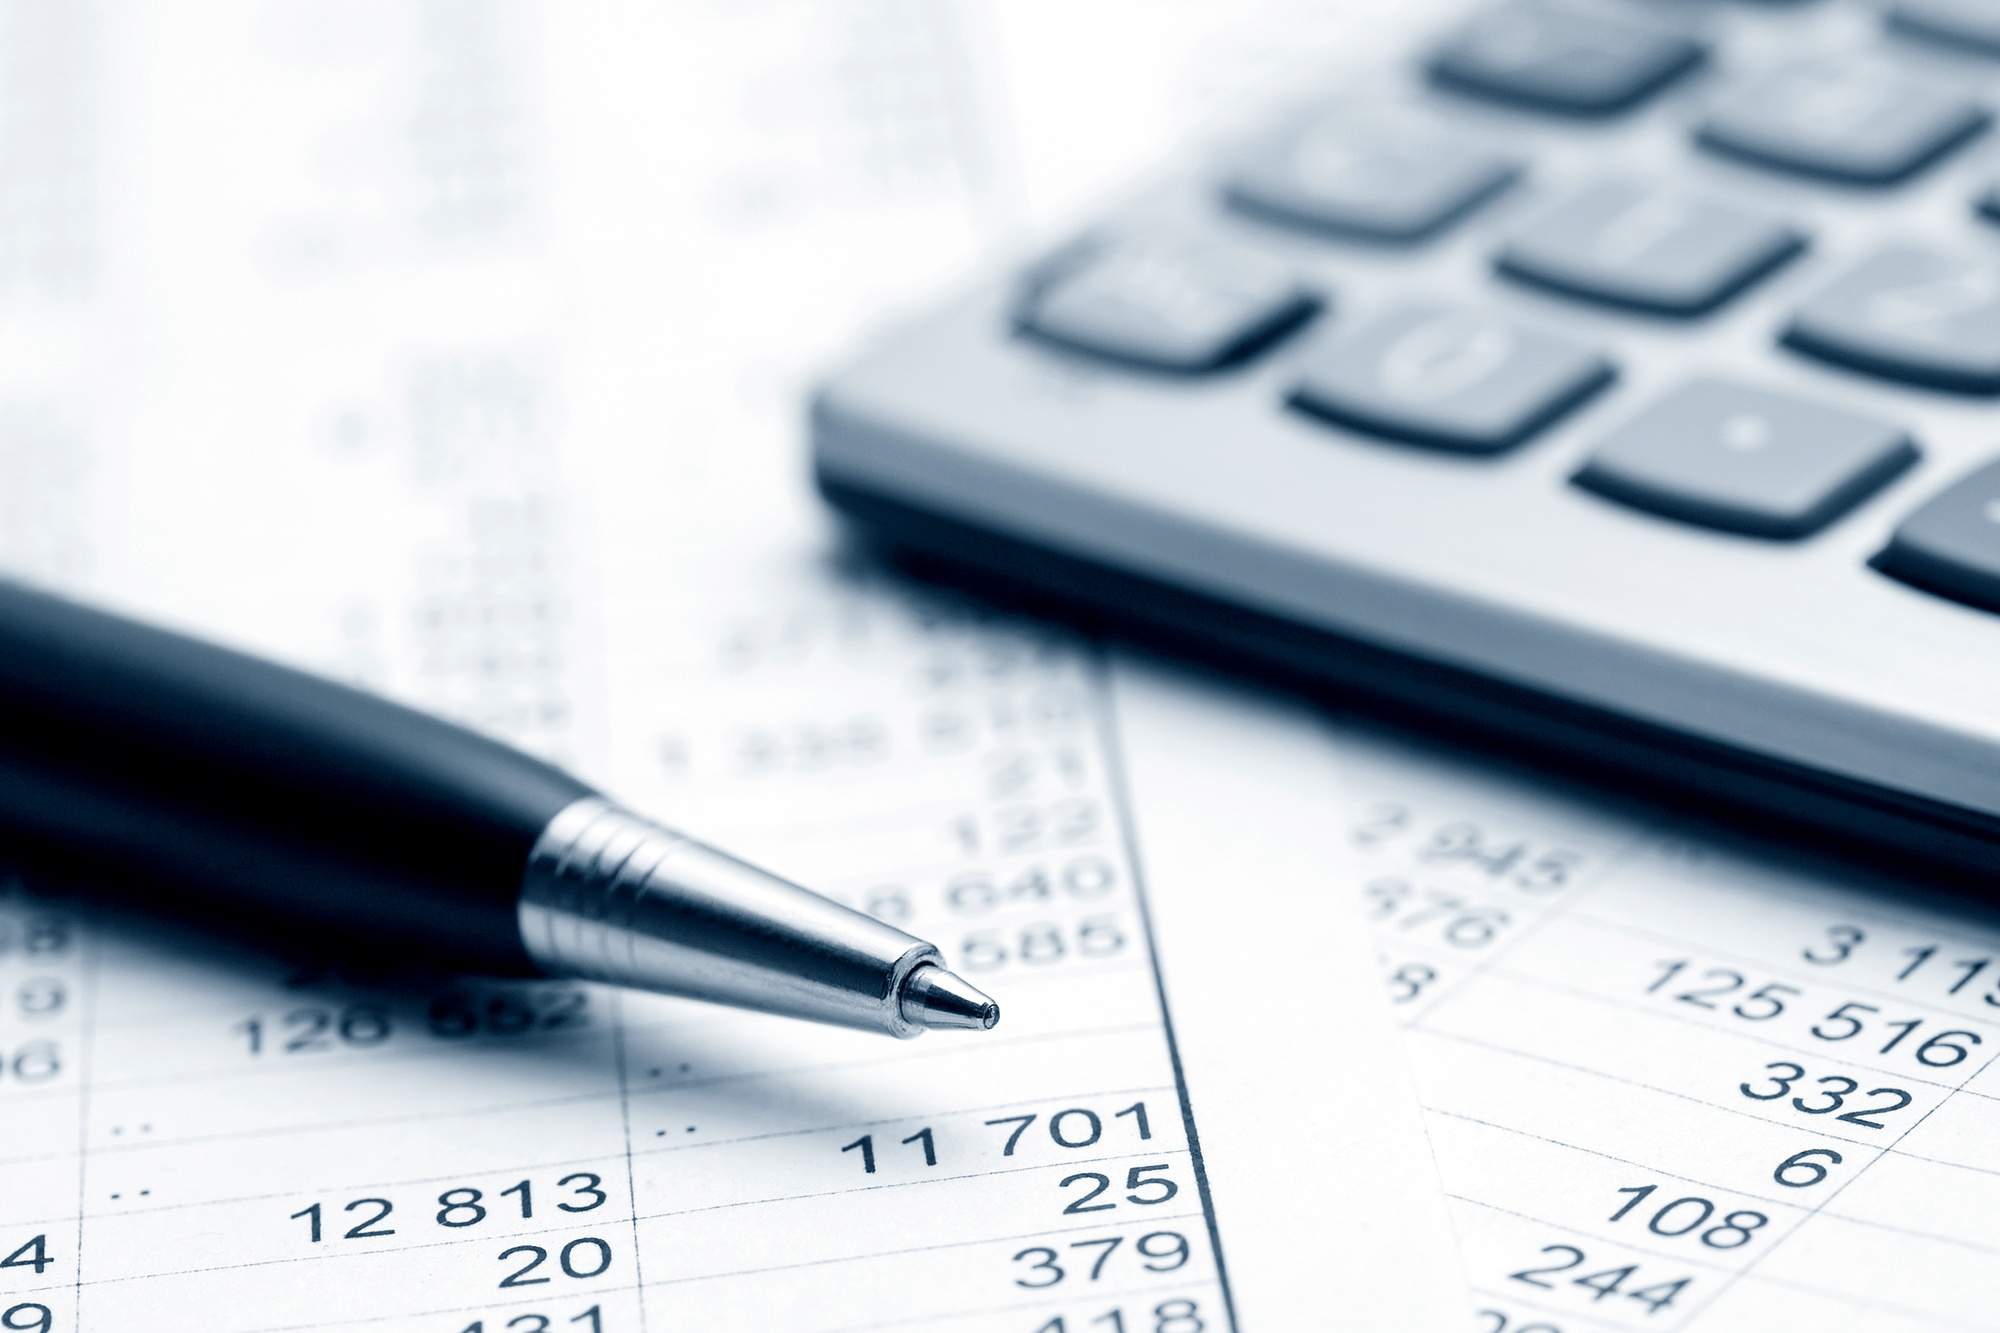 Does Your Business Need Professional Bookkeeping Services?